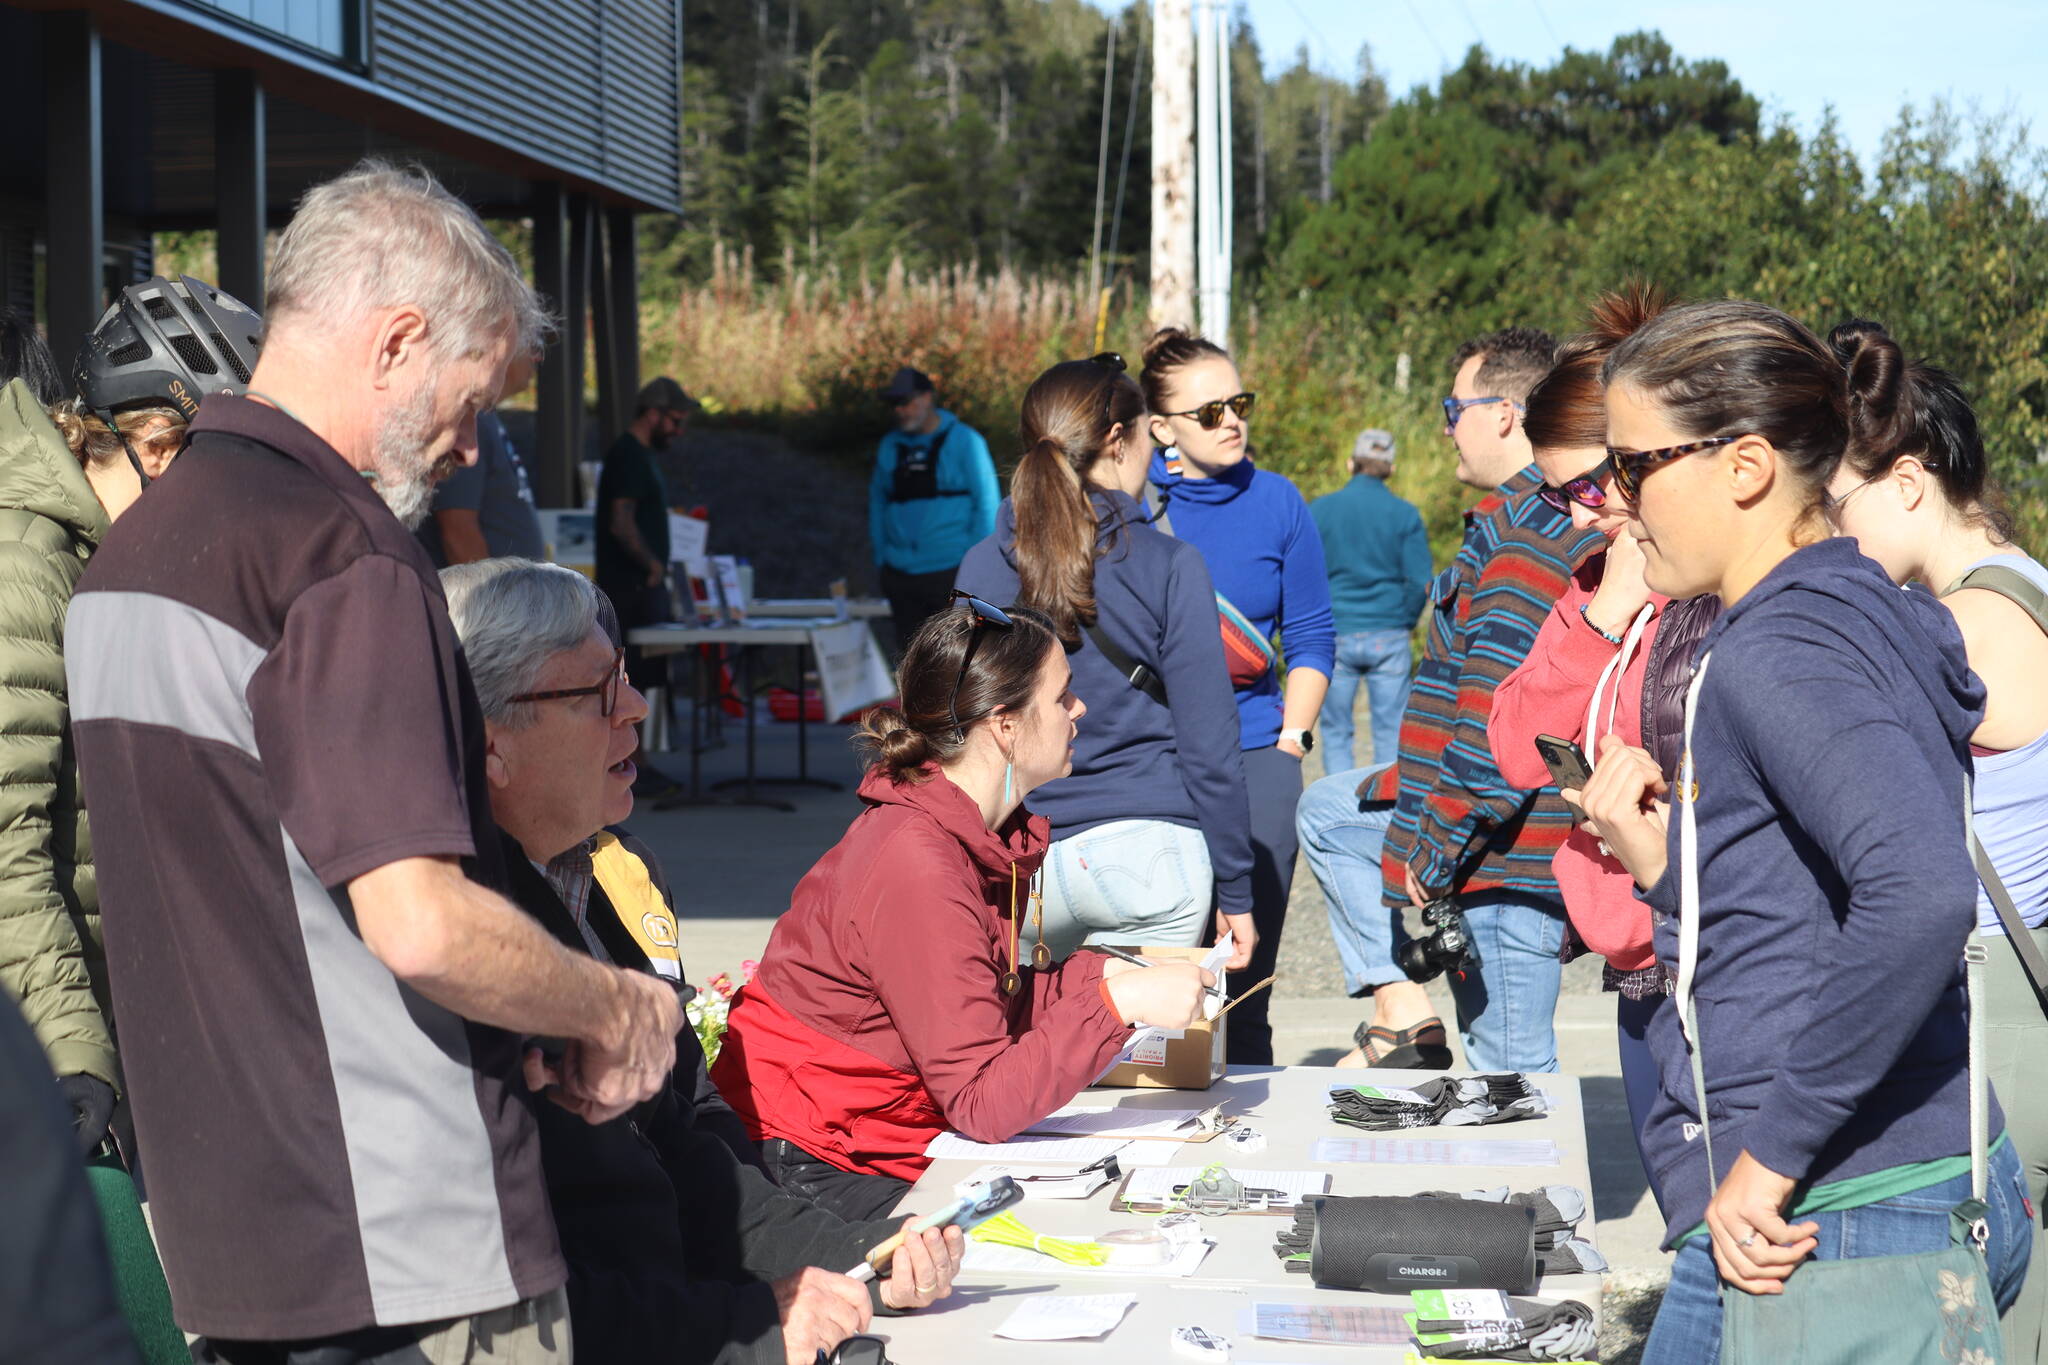 Juneau Mountain Bike Club was stationed at Discover Eaglecrest Day for its annual timed bike race at Flow Trail. There were also opportunities to sign up as a member and enjoy yearly benefits. (Jonson Kuhn / Juneau Empire)